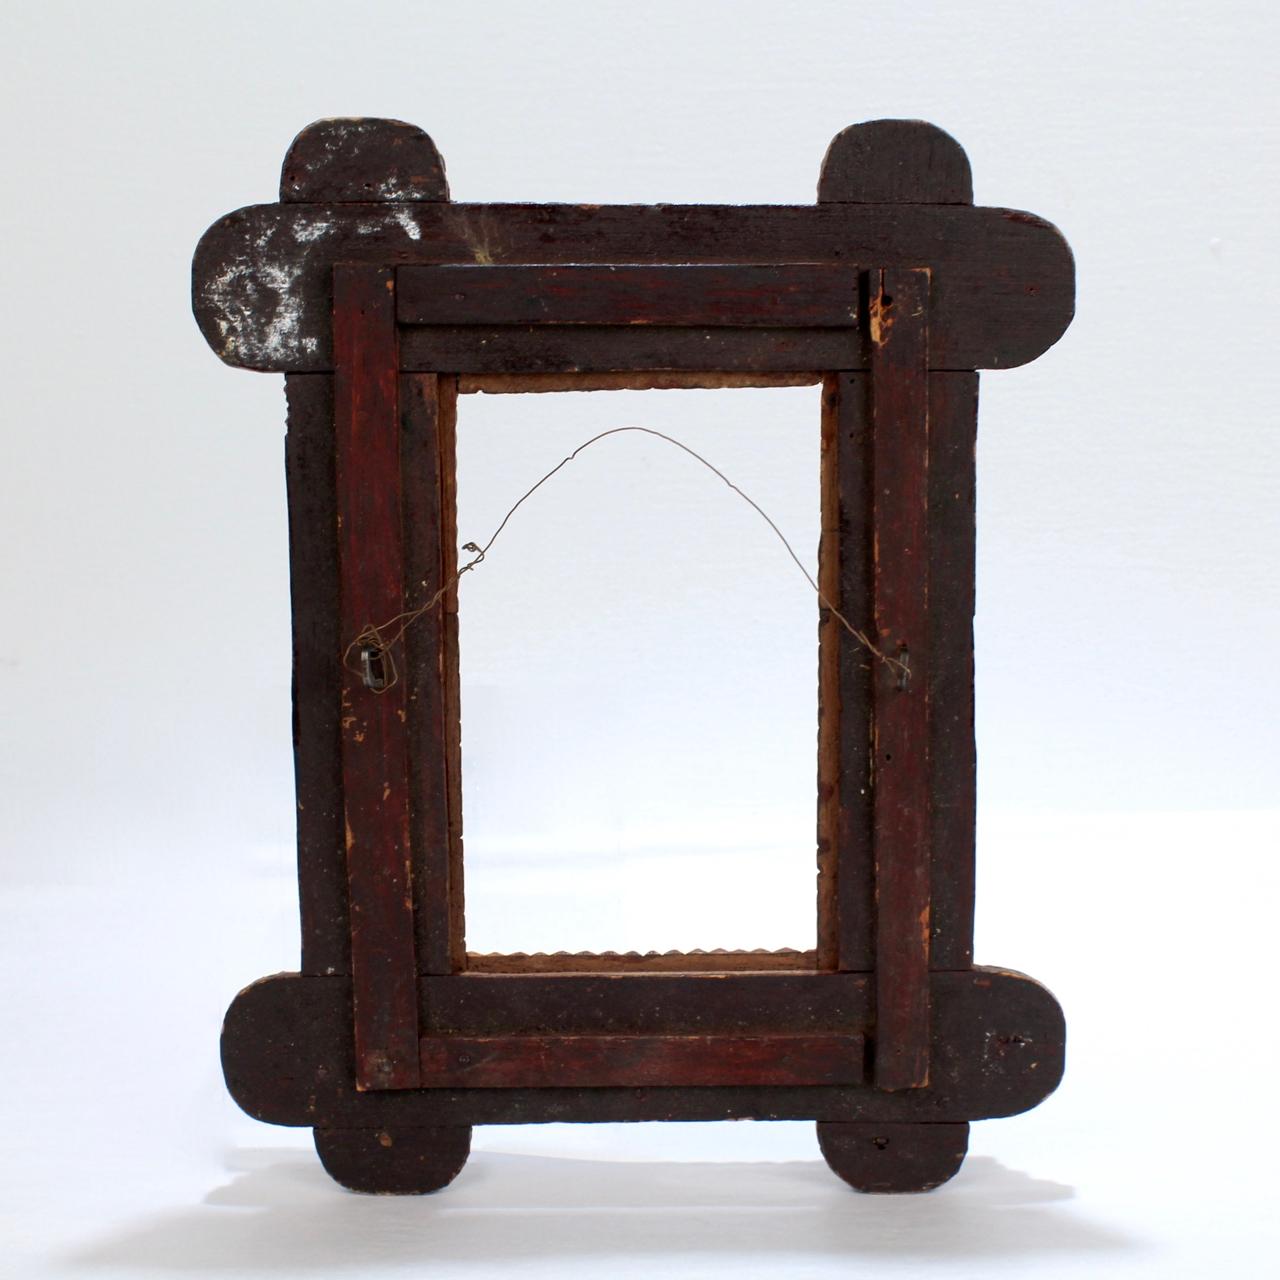 Antique Folk Art / Tramp Art Wooden Picture Frame with 5 Levels 1